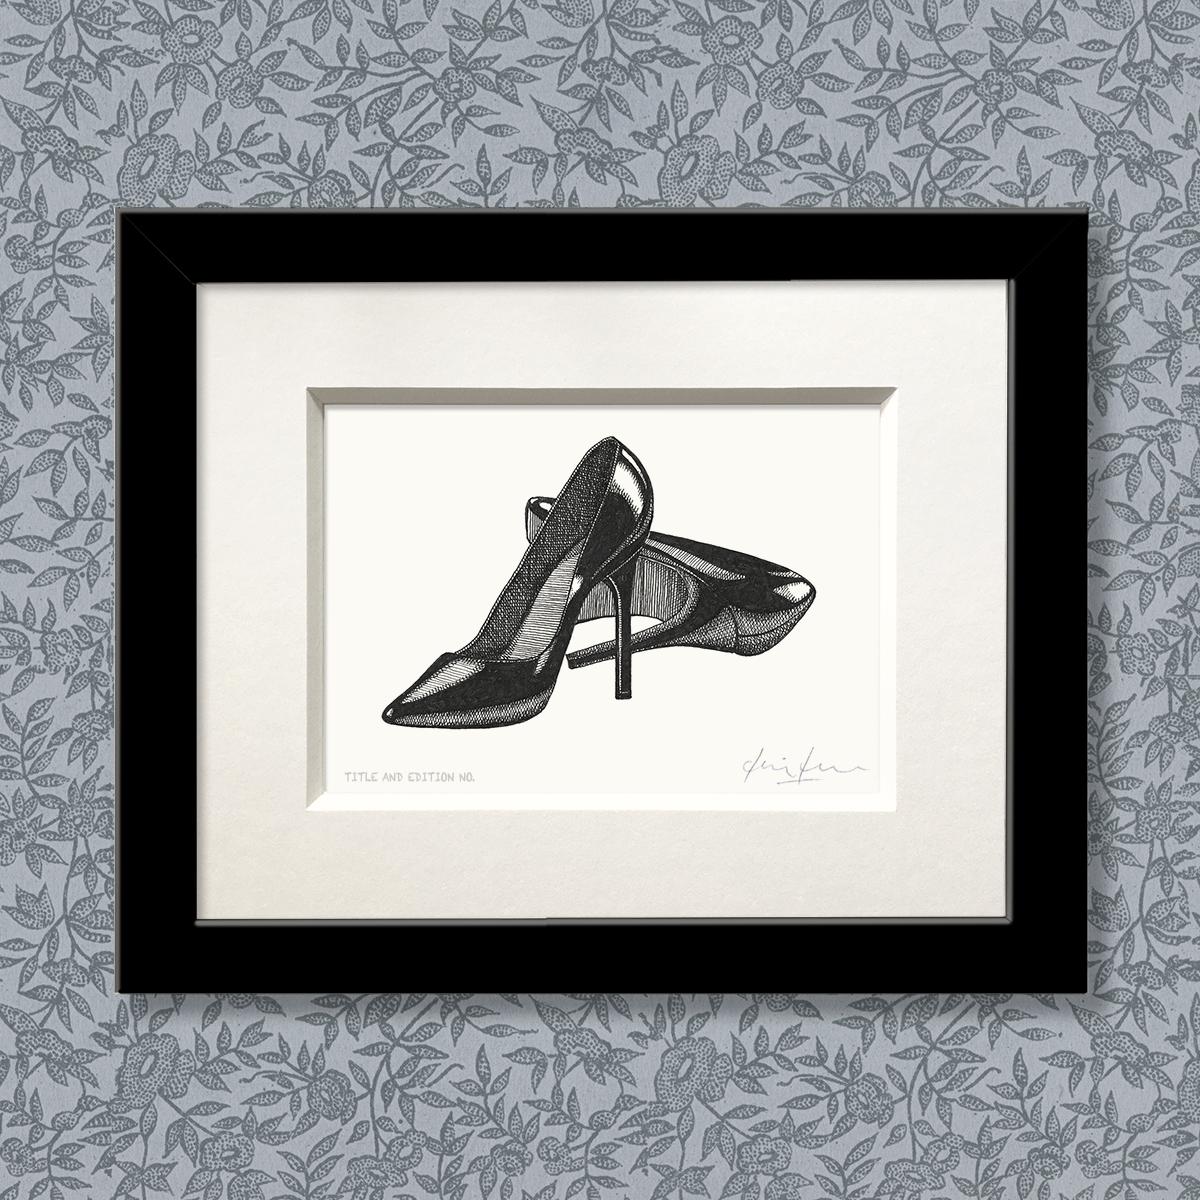 Limited edition print from pen and ink drawing of a pair of stiletto heels in a black frame